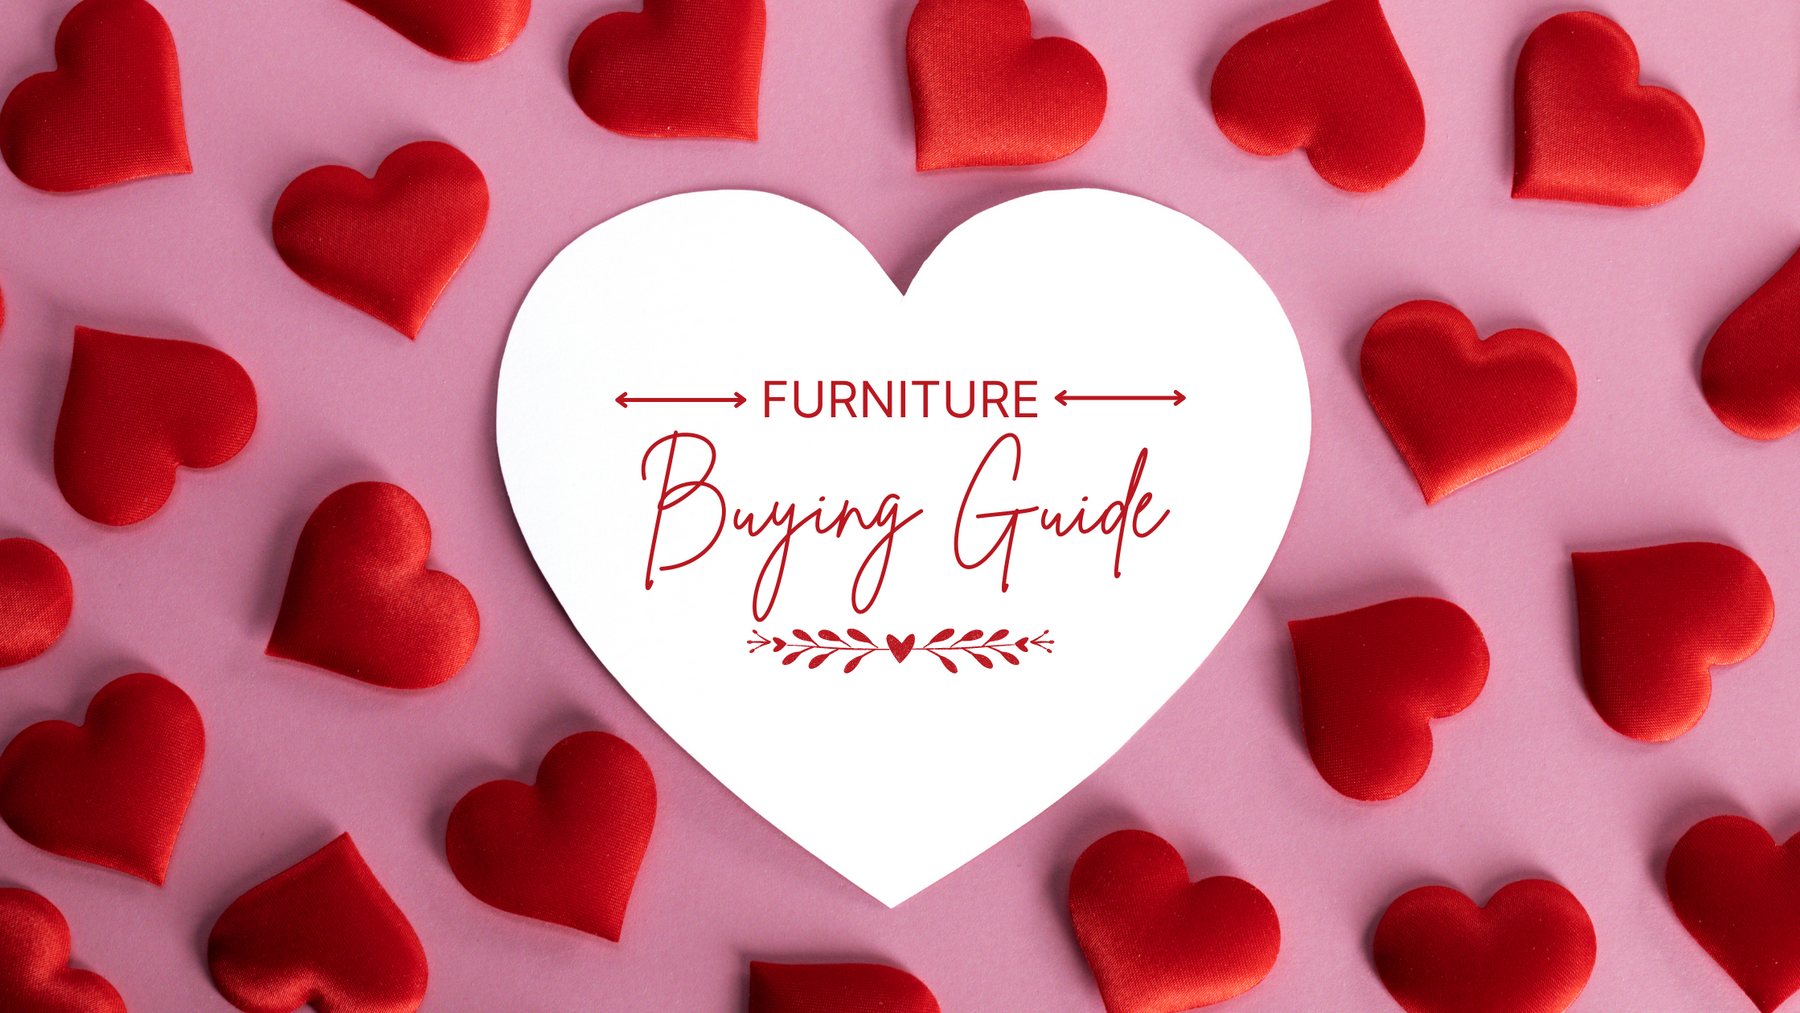 Furniture Buying Guide This Valentines Day 2022.